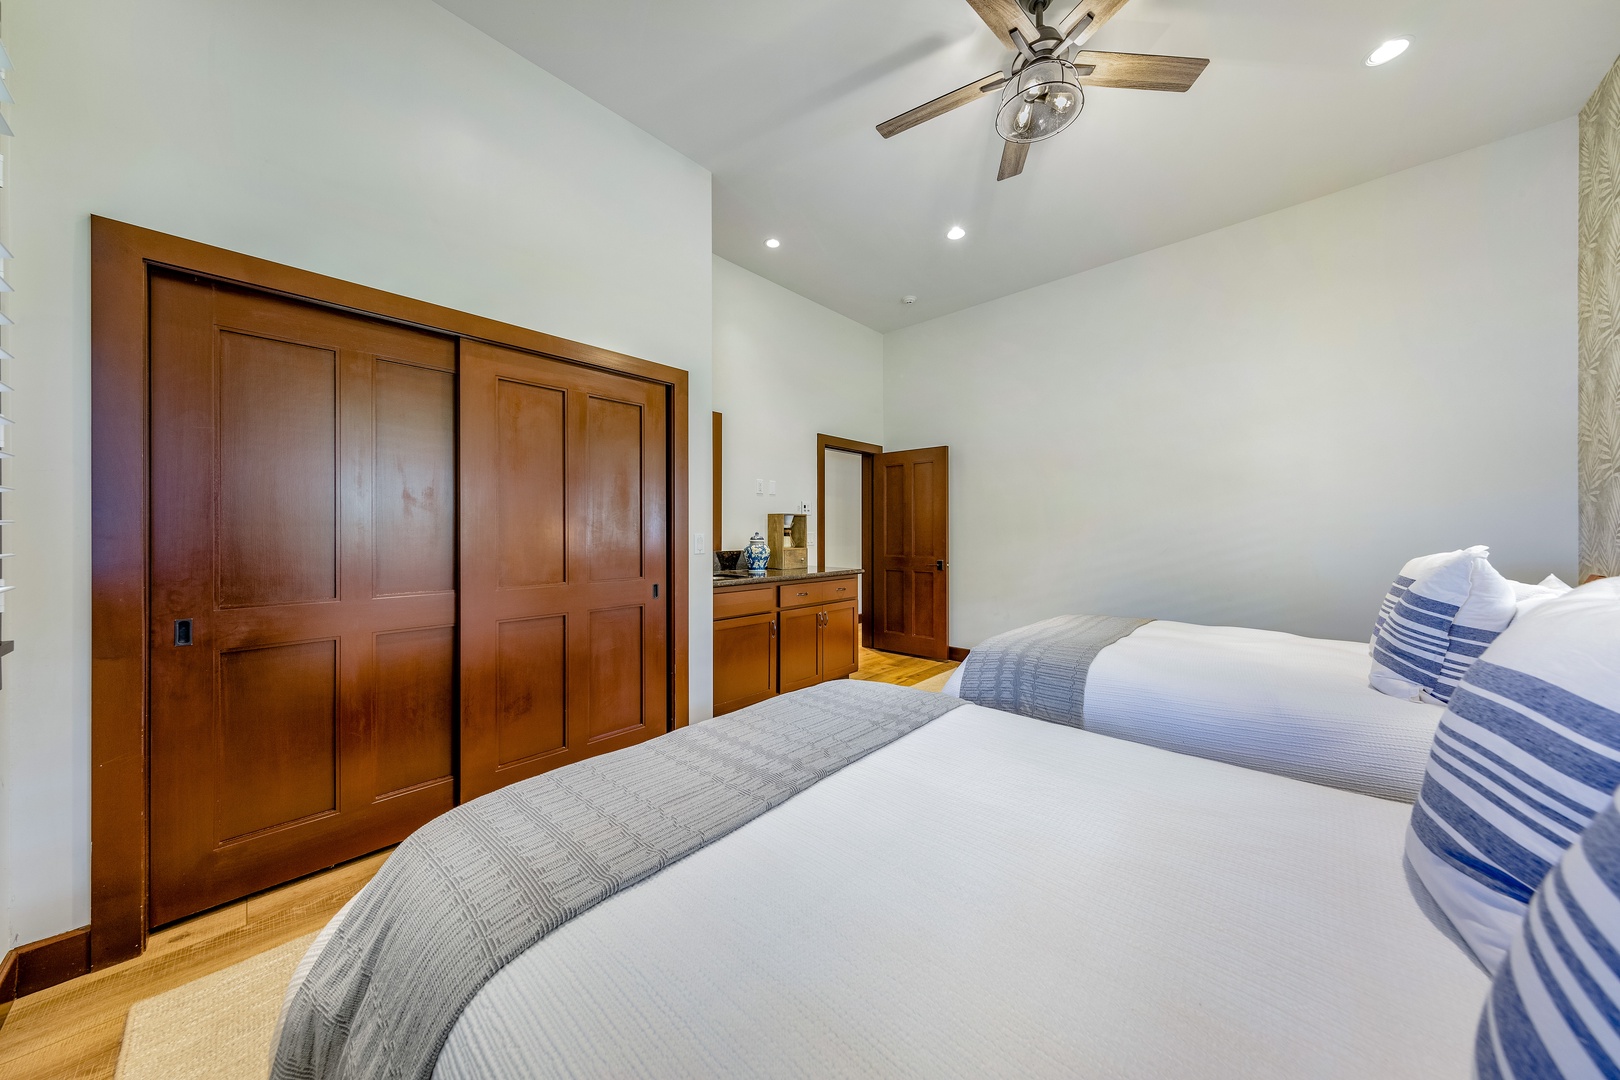 Kailua Kona Vacation Rentals, Kailua Kona Estate** - Plenty of closet space for guests in the fourth bedroom.